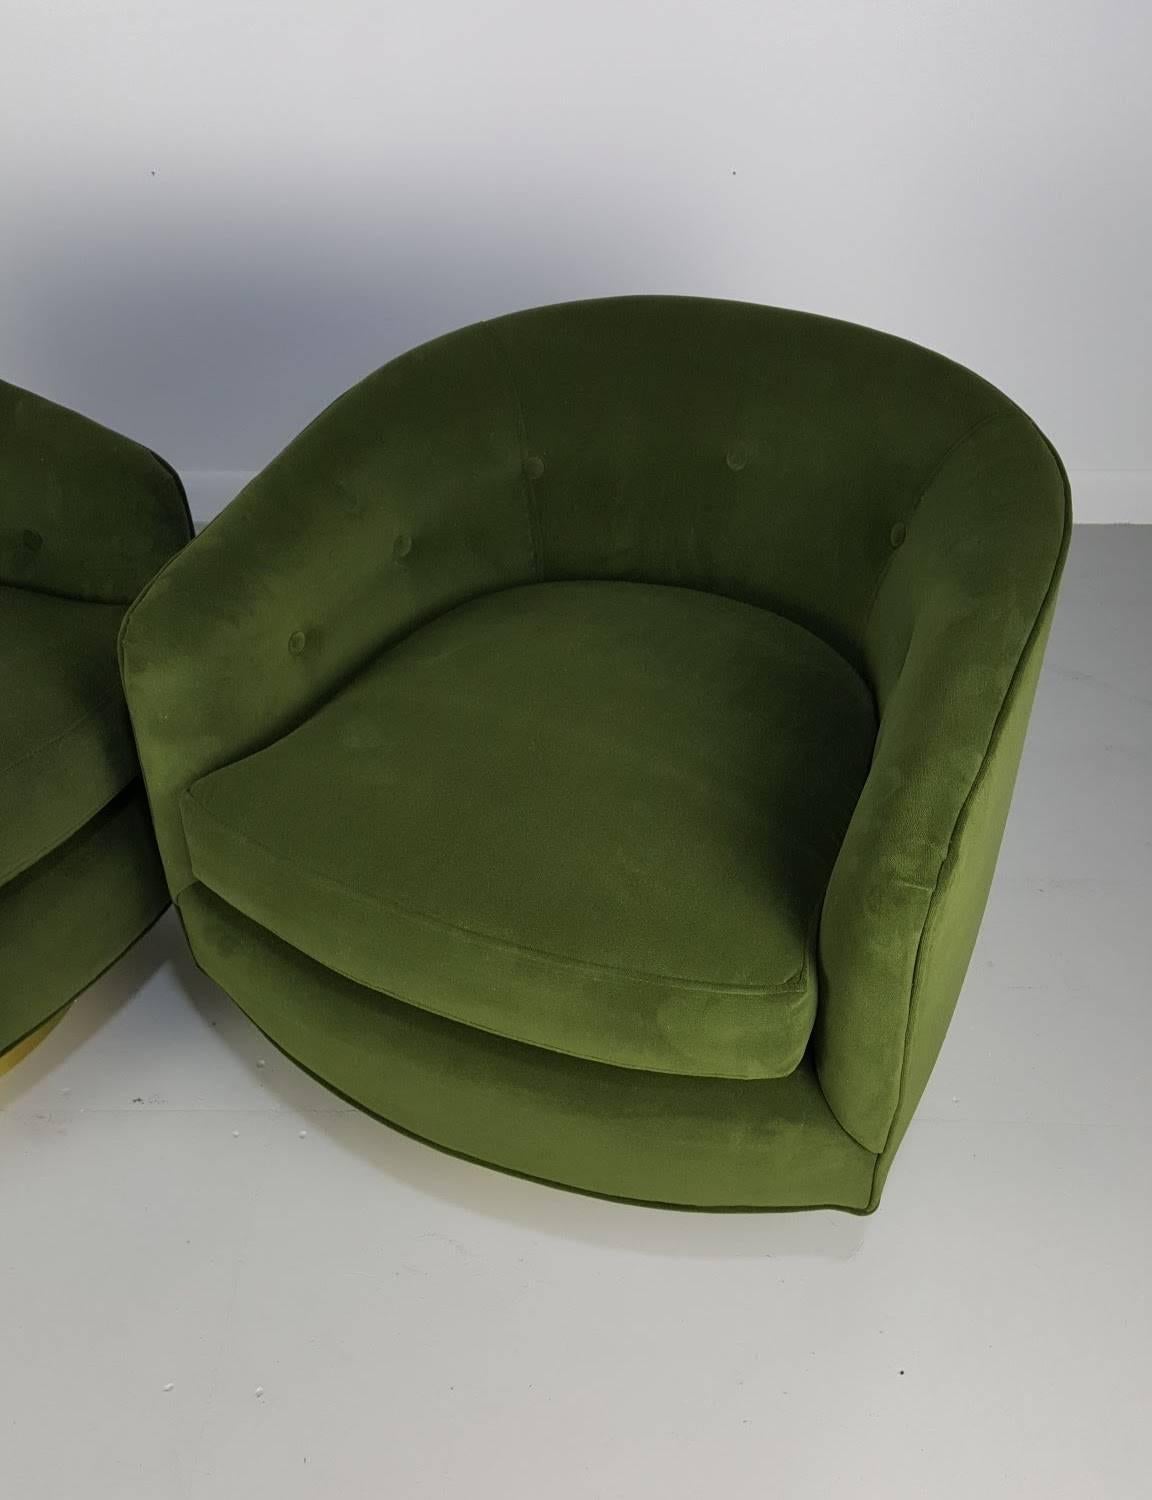 American Swivel Lounge Chairs in Velvet with Polished Brass Bases, style of Milo Baughman